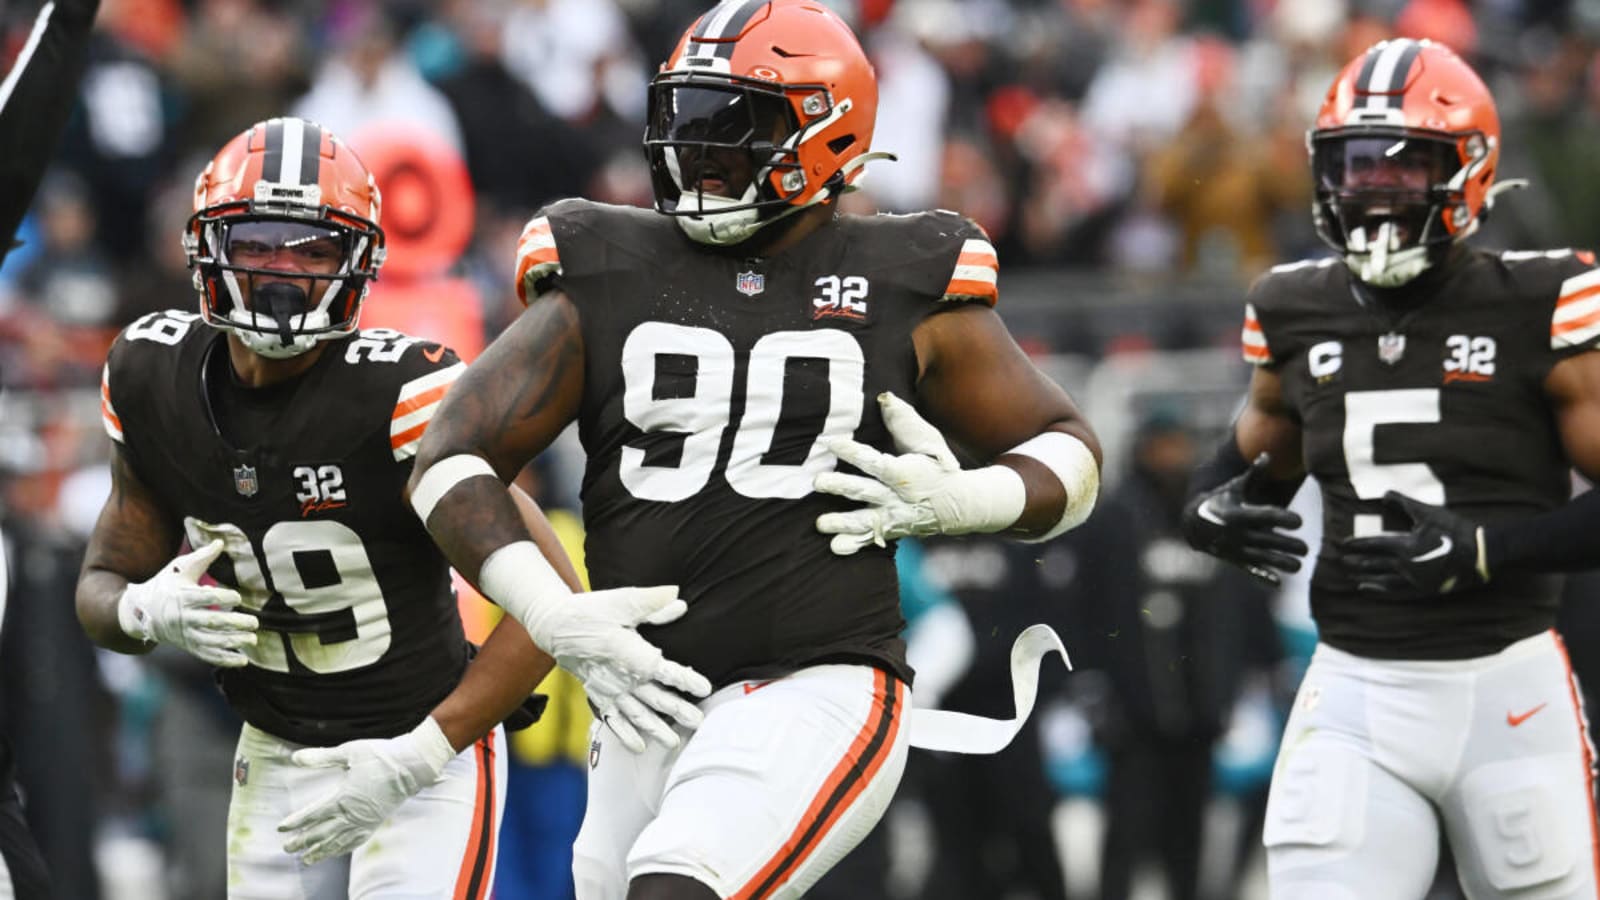 Maurice Hurst Shared Special Message On Social Media For Browns Teammates